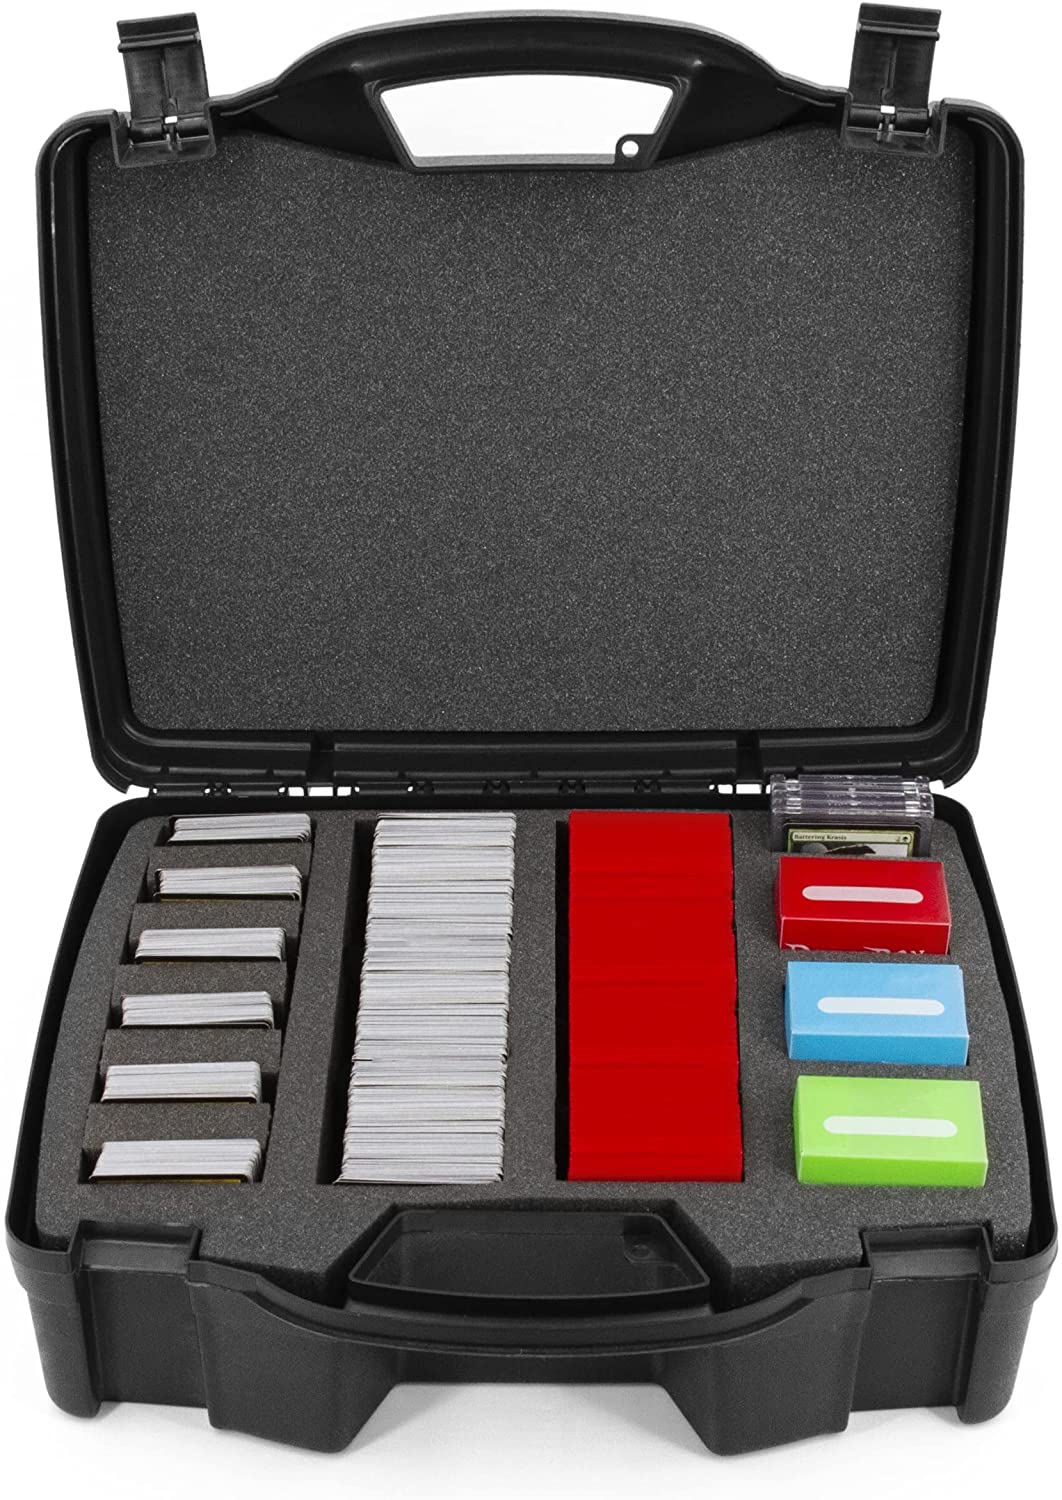 CASEMATIX Trading Card Case and Card Game Organizer for 3200 Cards - 16  Hard Shell Card Case Holder for Trading Cards with 40 Dividers